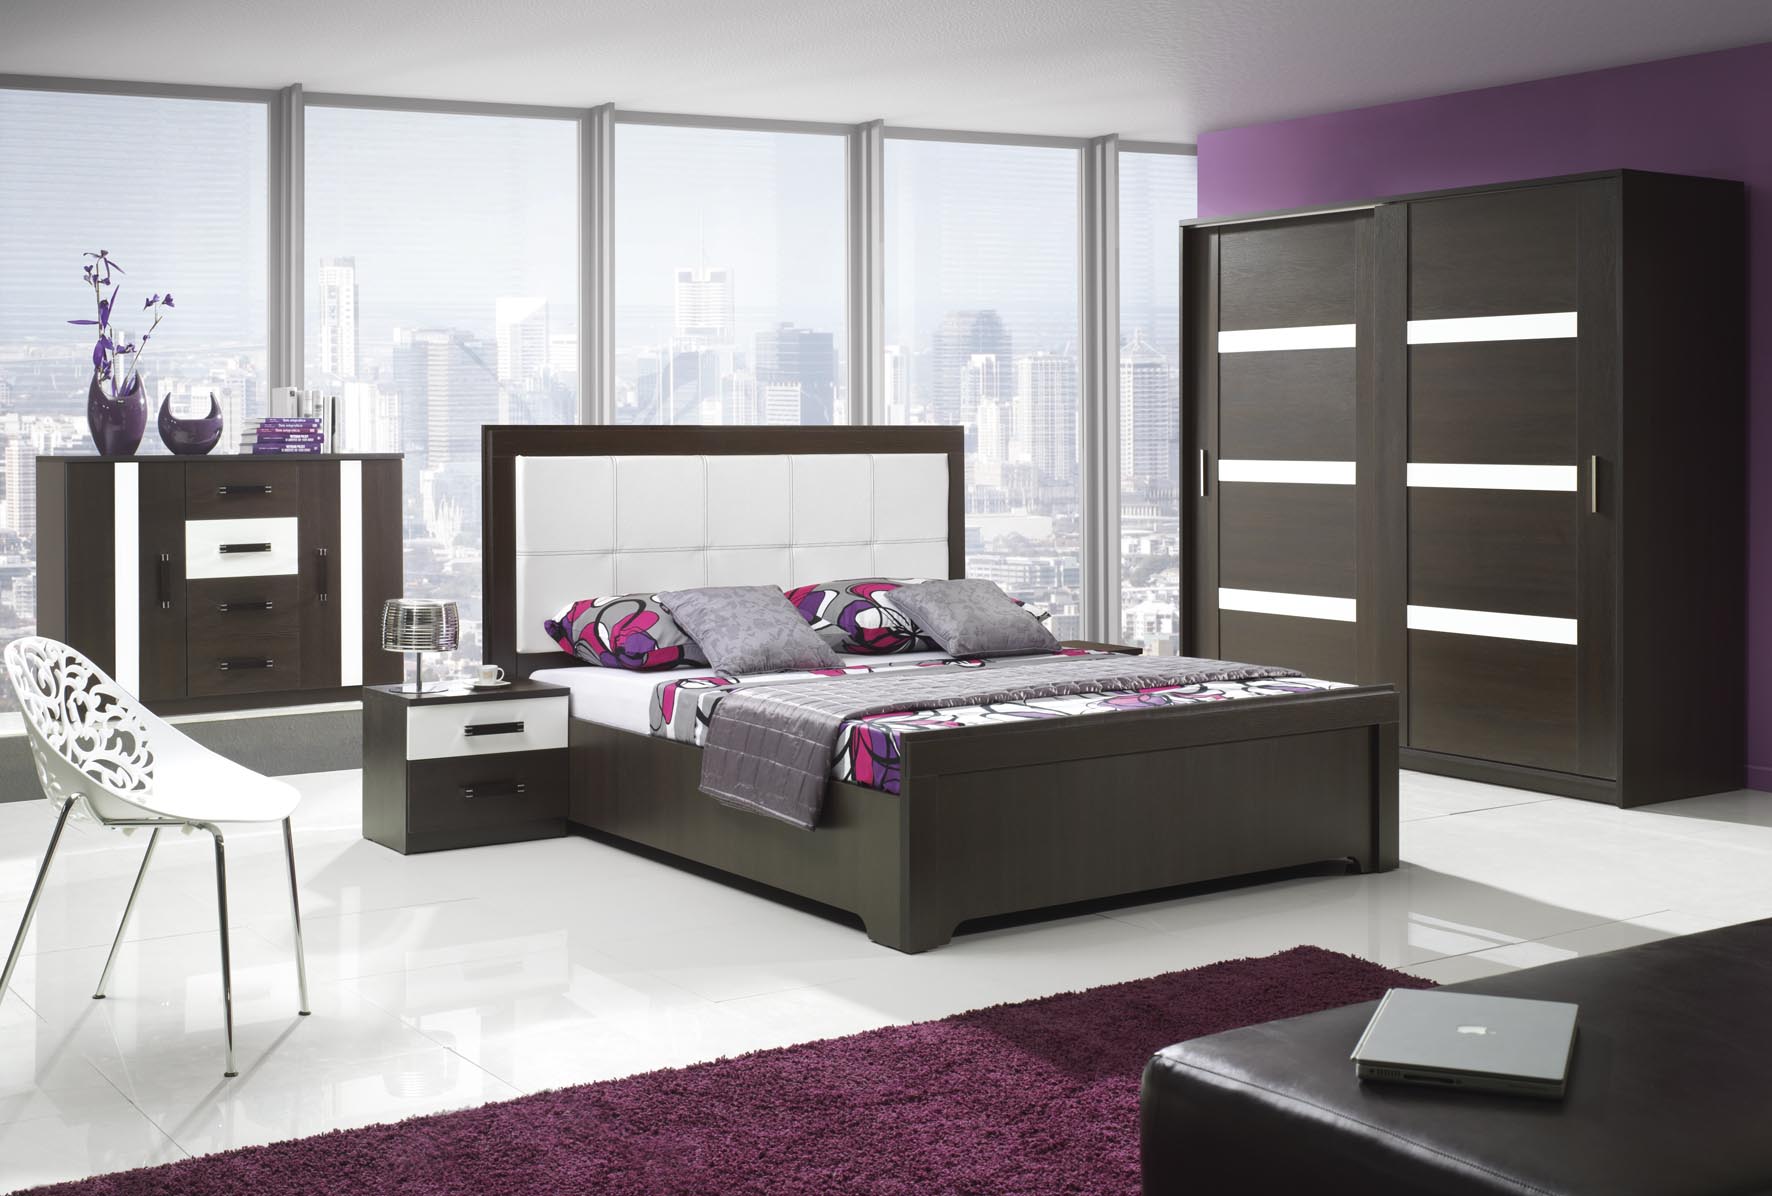 25 Bedroom Furniture Design Ideas The WoW Style